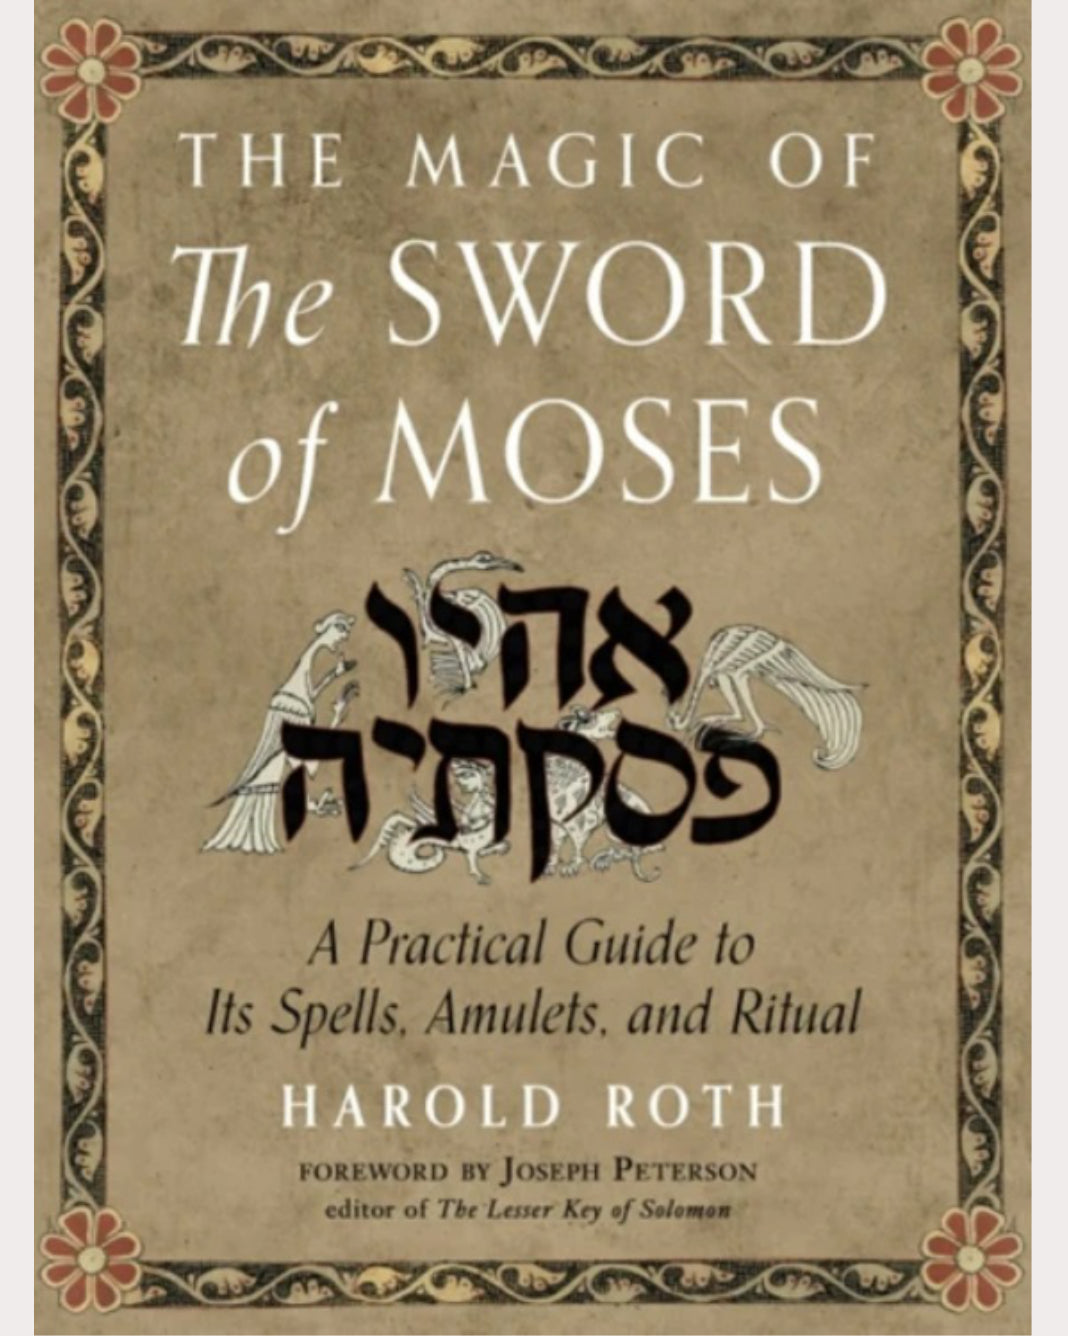 The Magic of the Sword of Moses